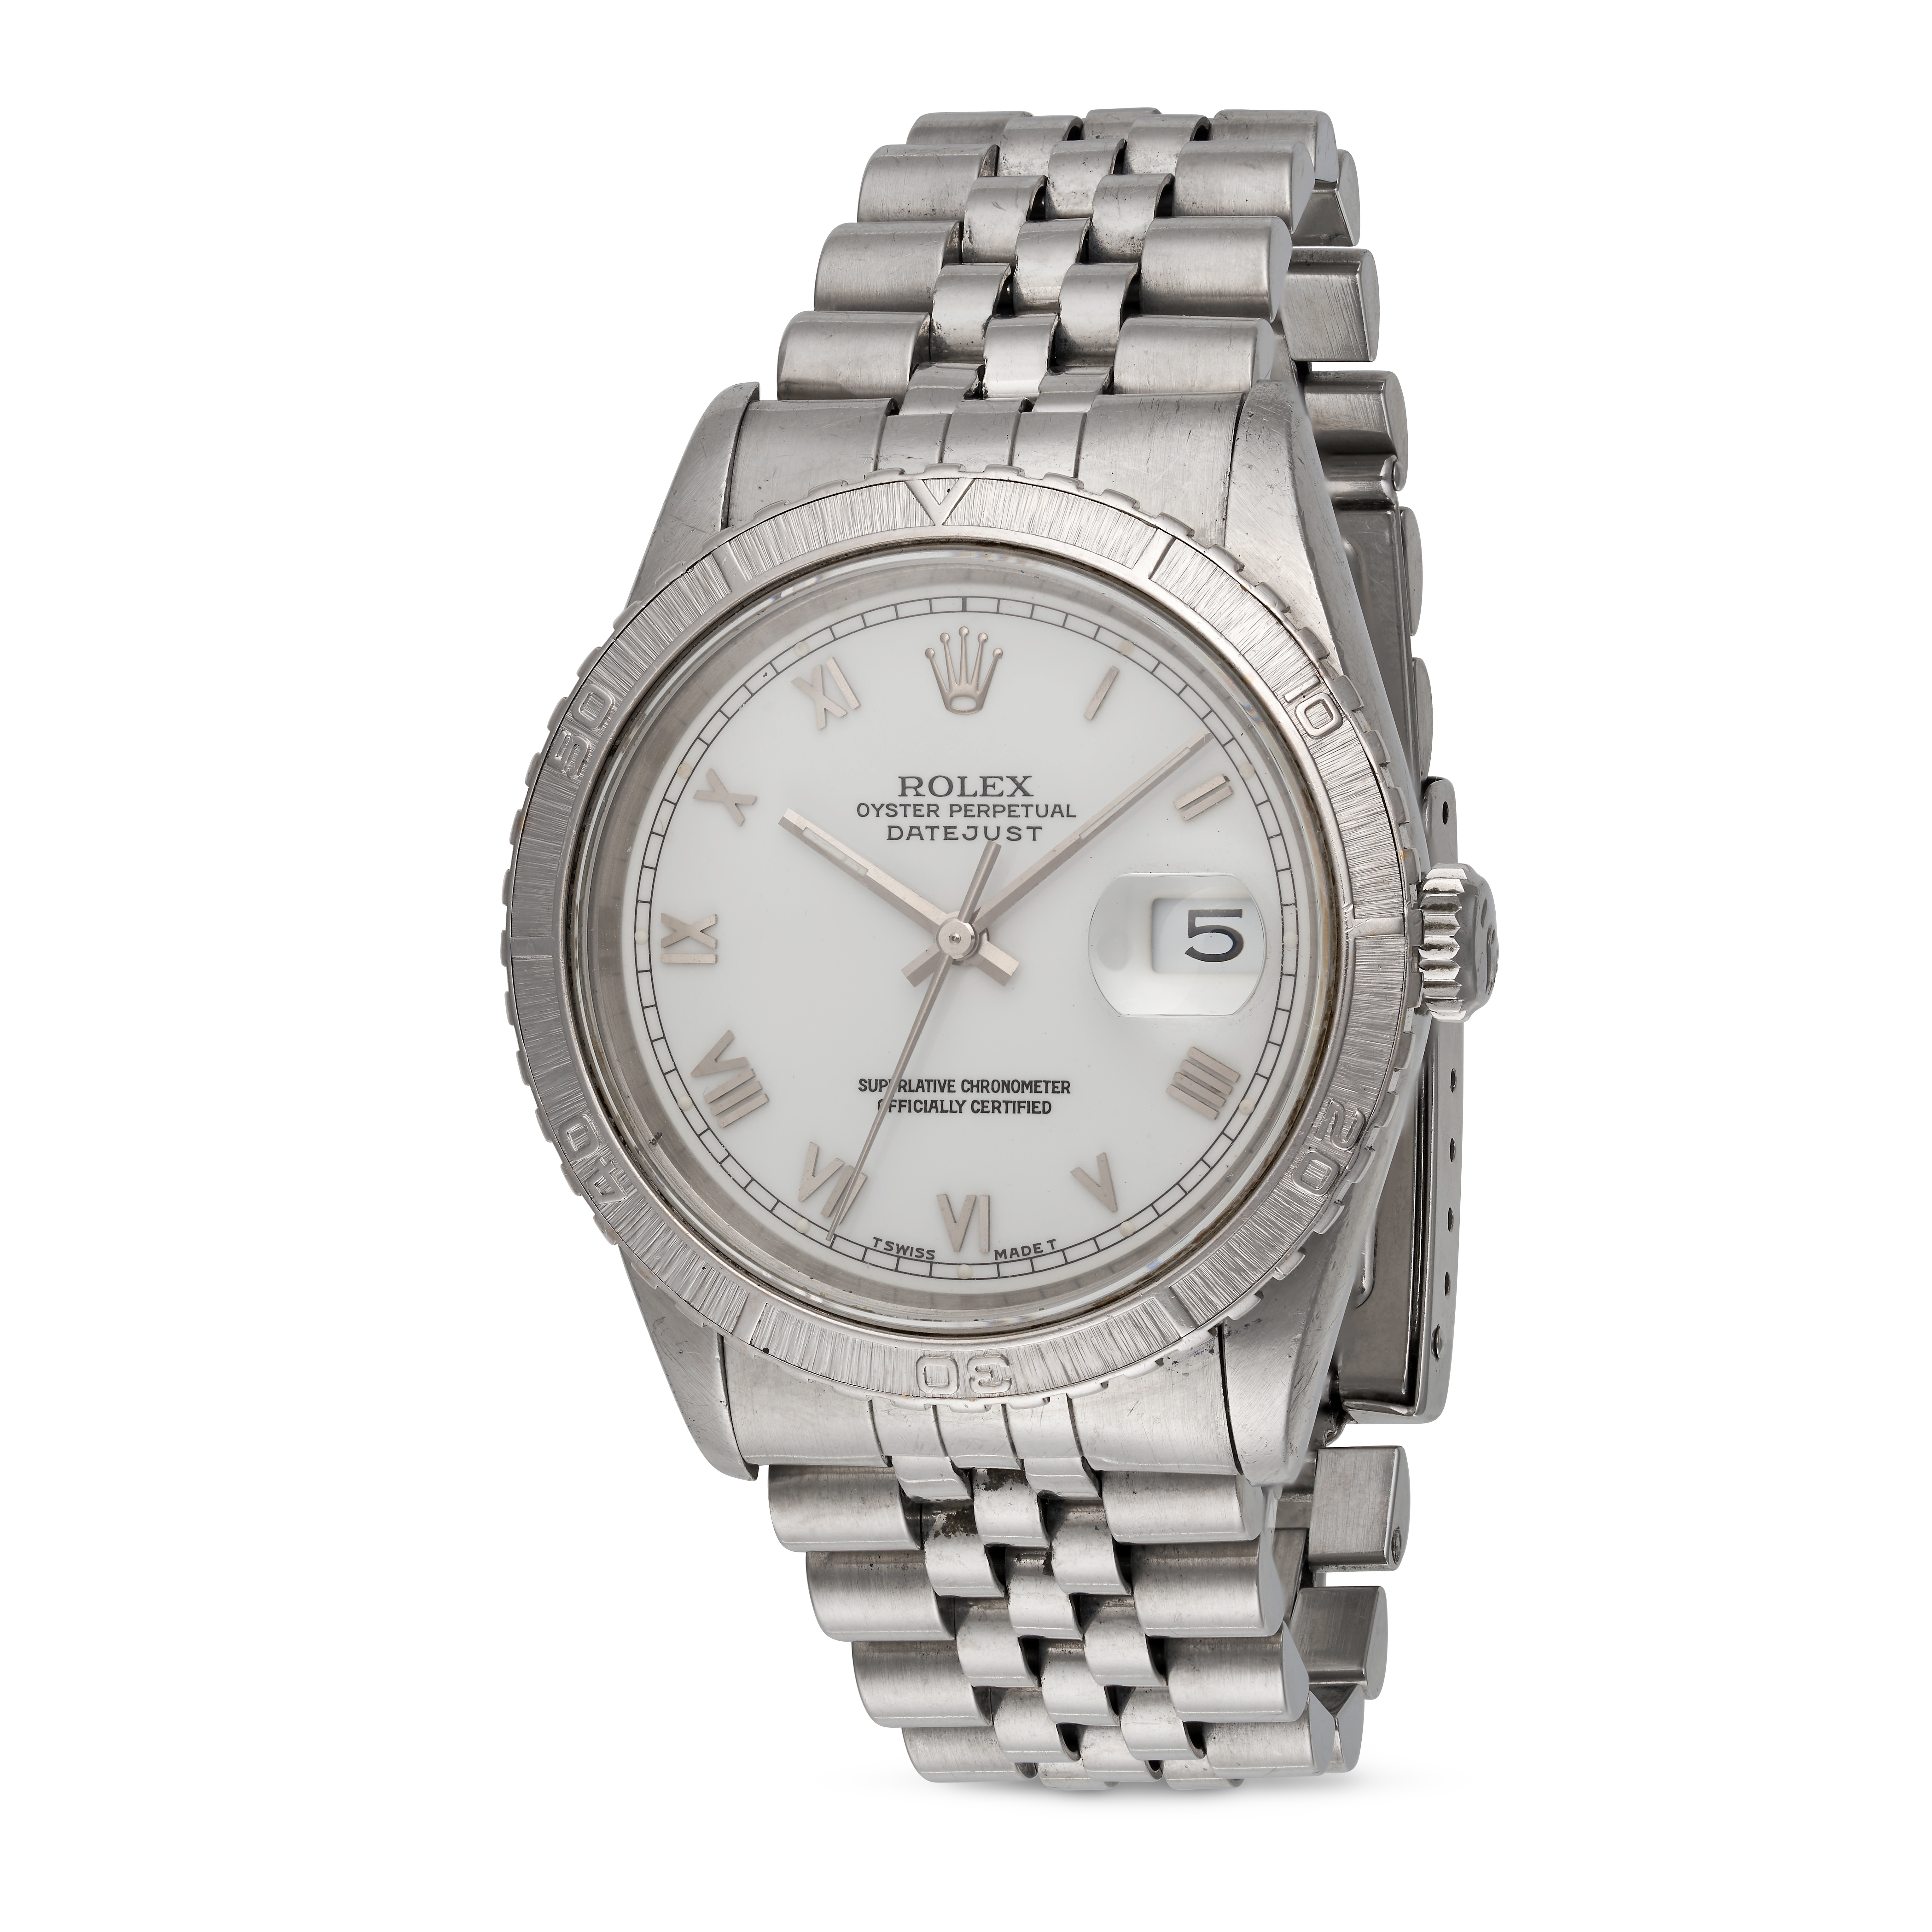 ROLEX - A ROLEX OYSTER PERPETUAL DATEJUST WRISTWATCH in stainless steel, 16264, T21XXXX, the circ...